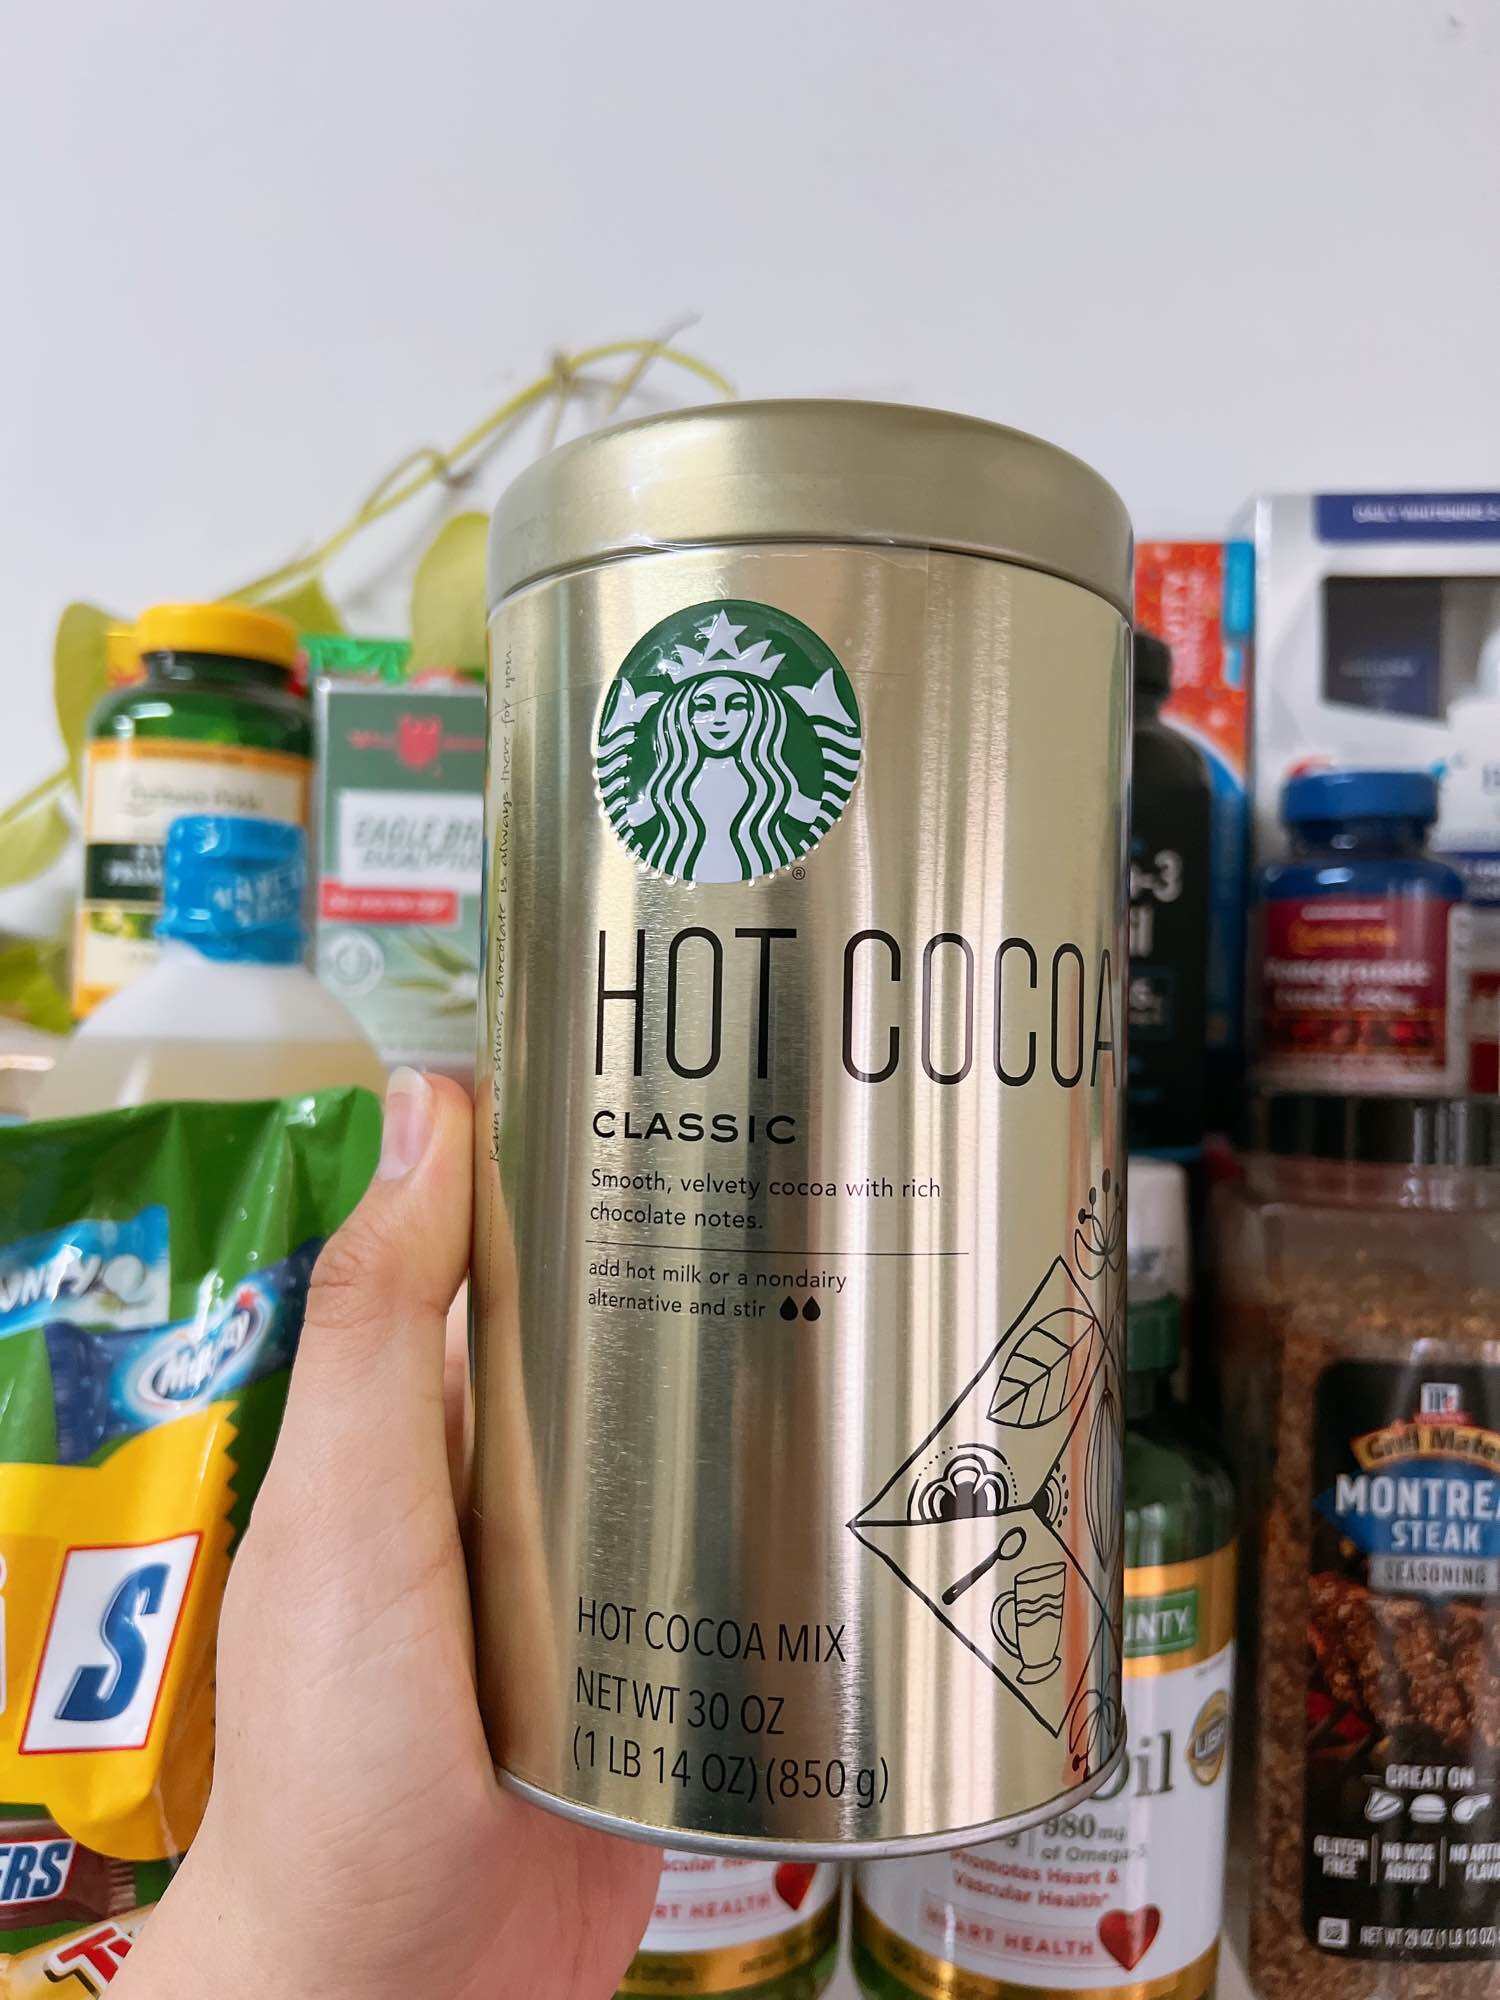 Bột cacao Starbucks Hot Cocoa Classic 850g Mỹ.